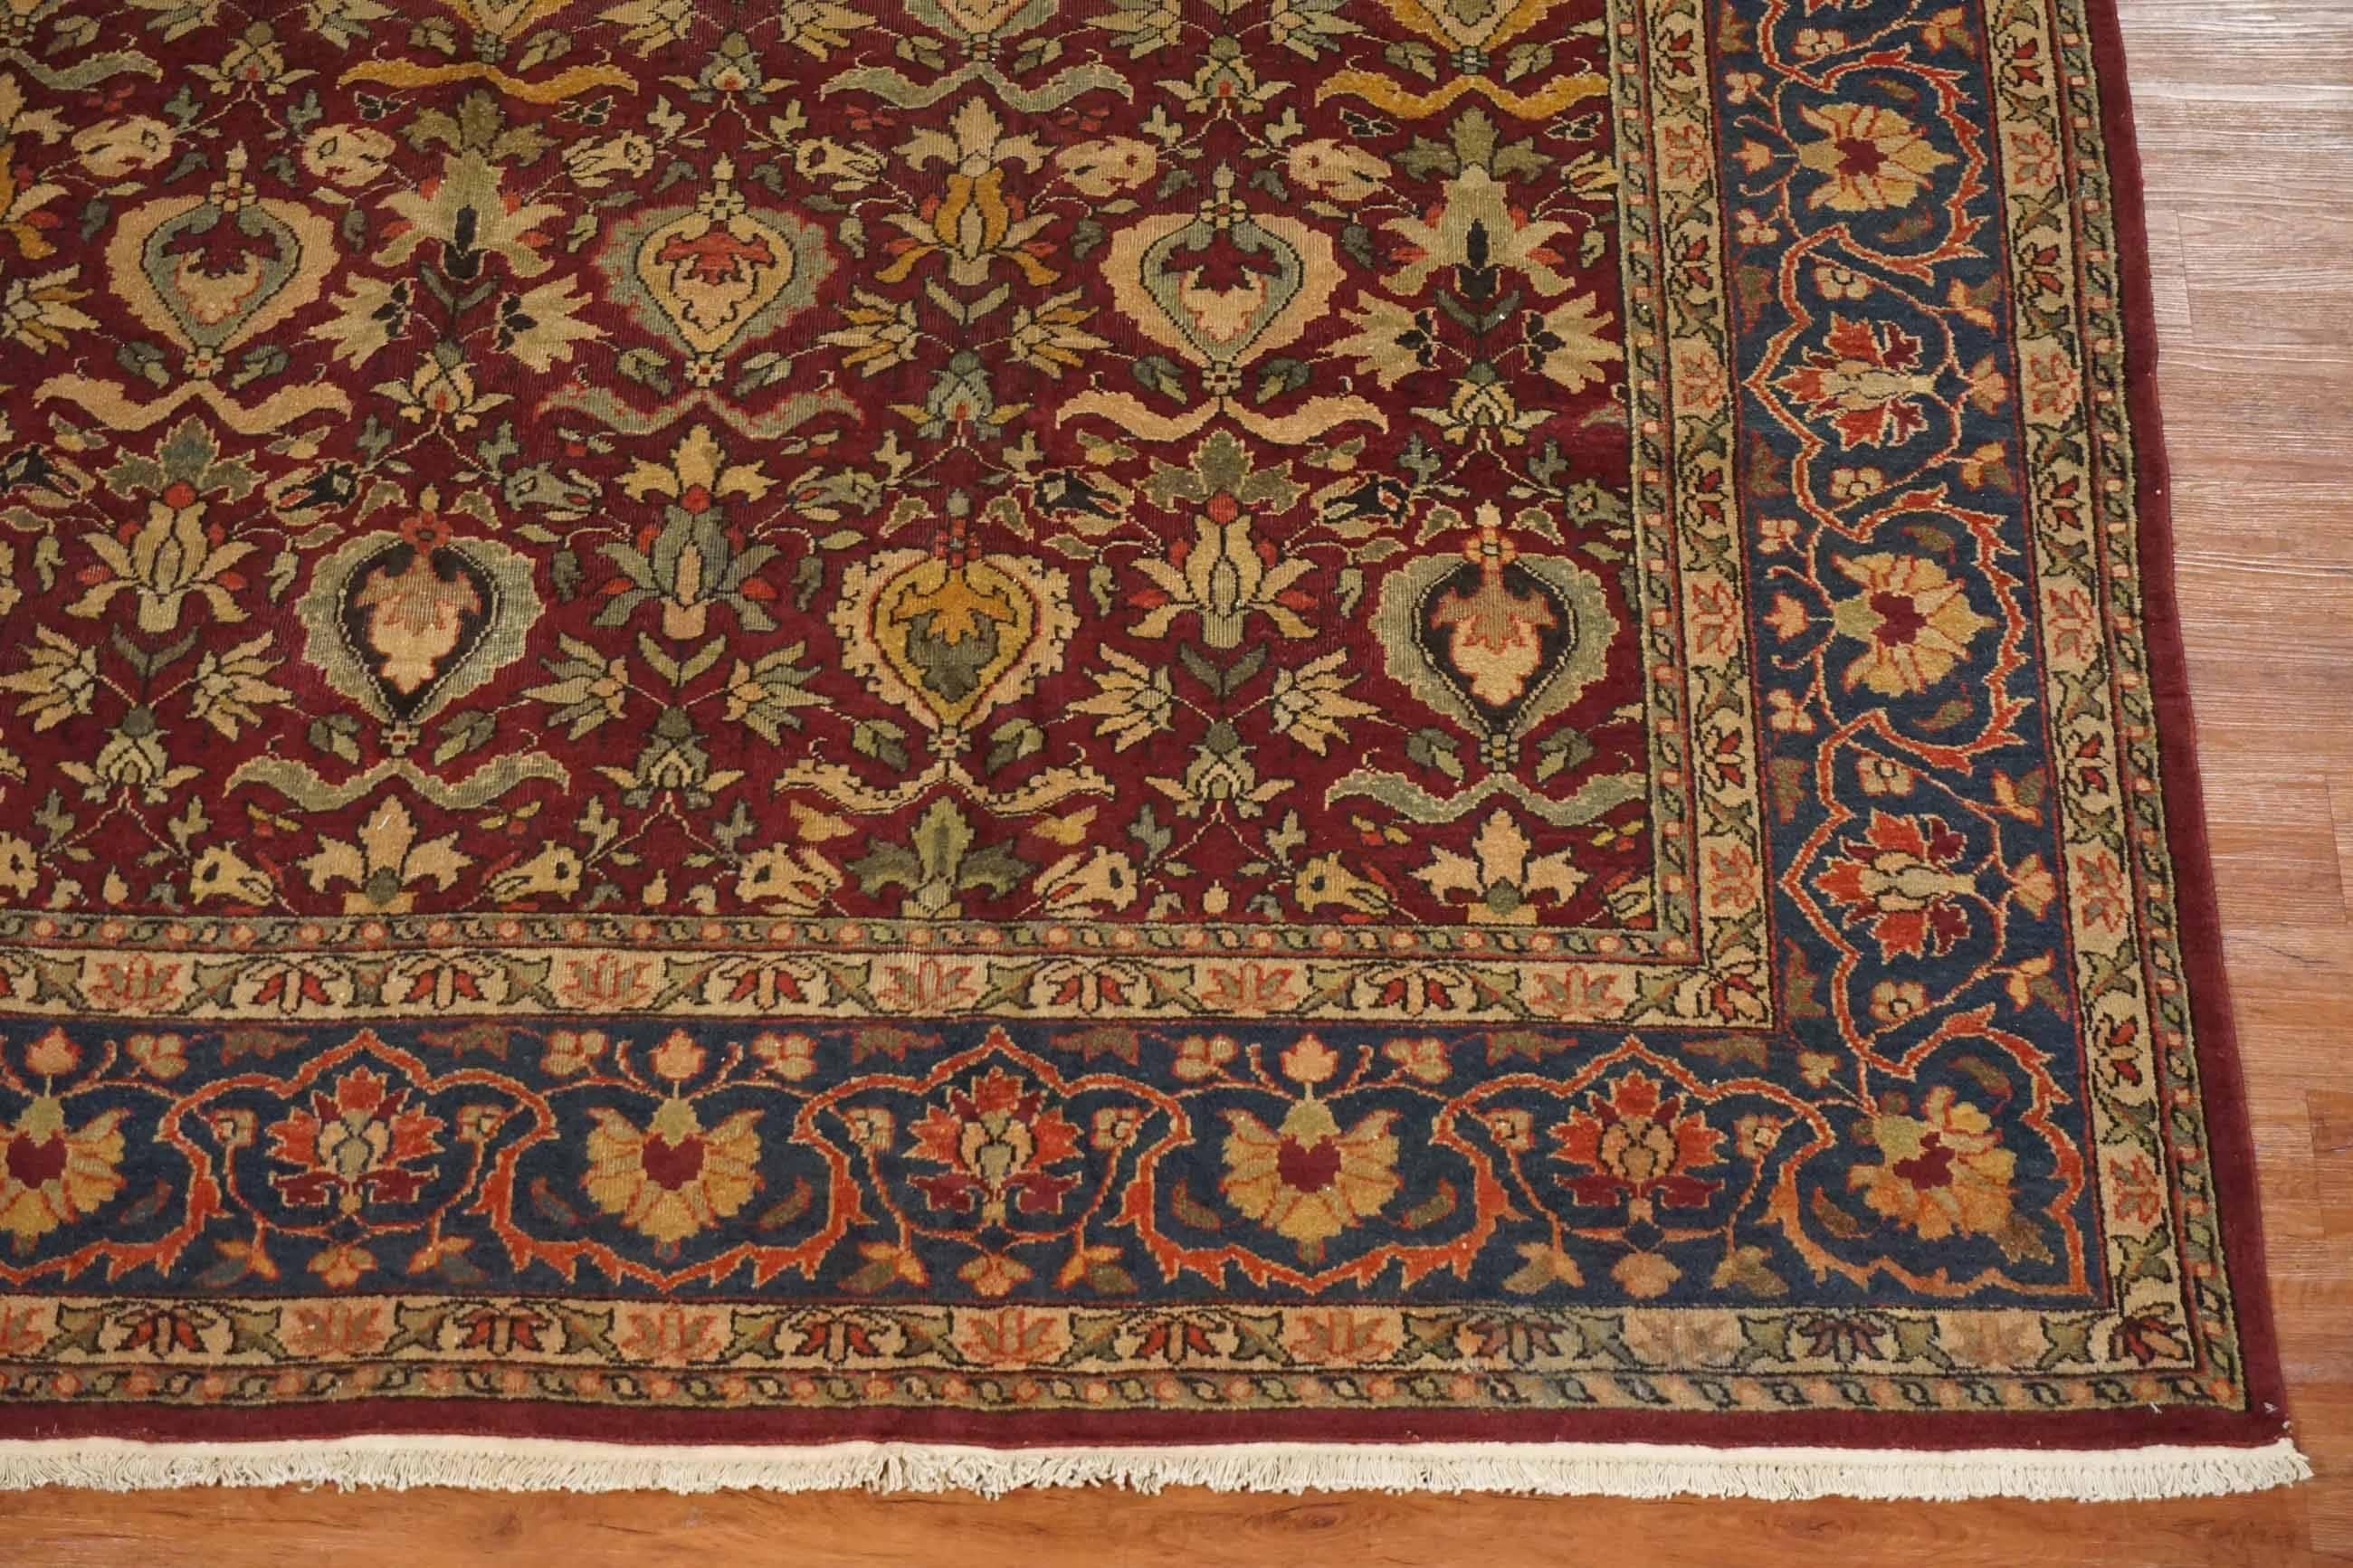 20th Century Antique Burgundy Indian Agra Rug, circa 1900 For Sale